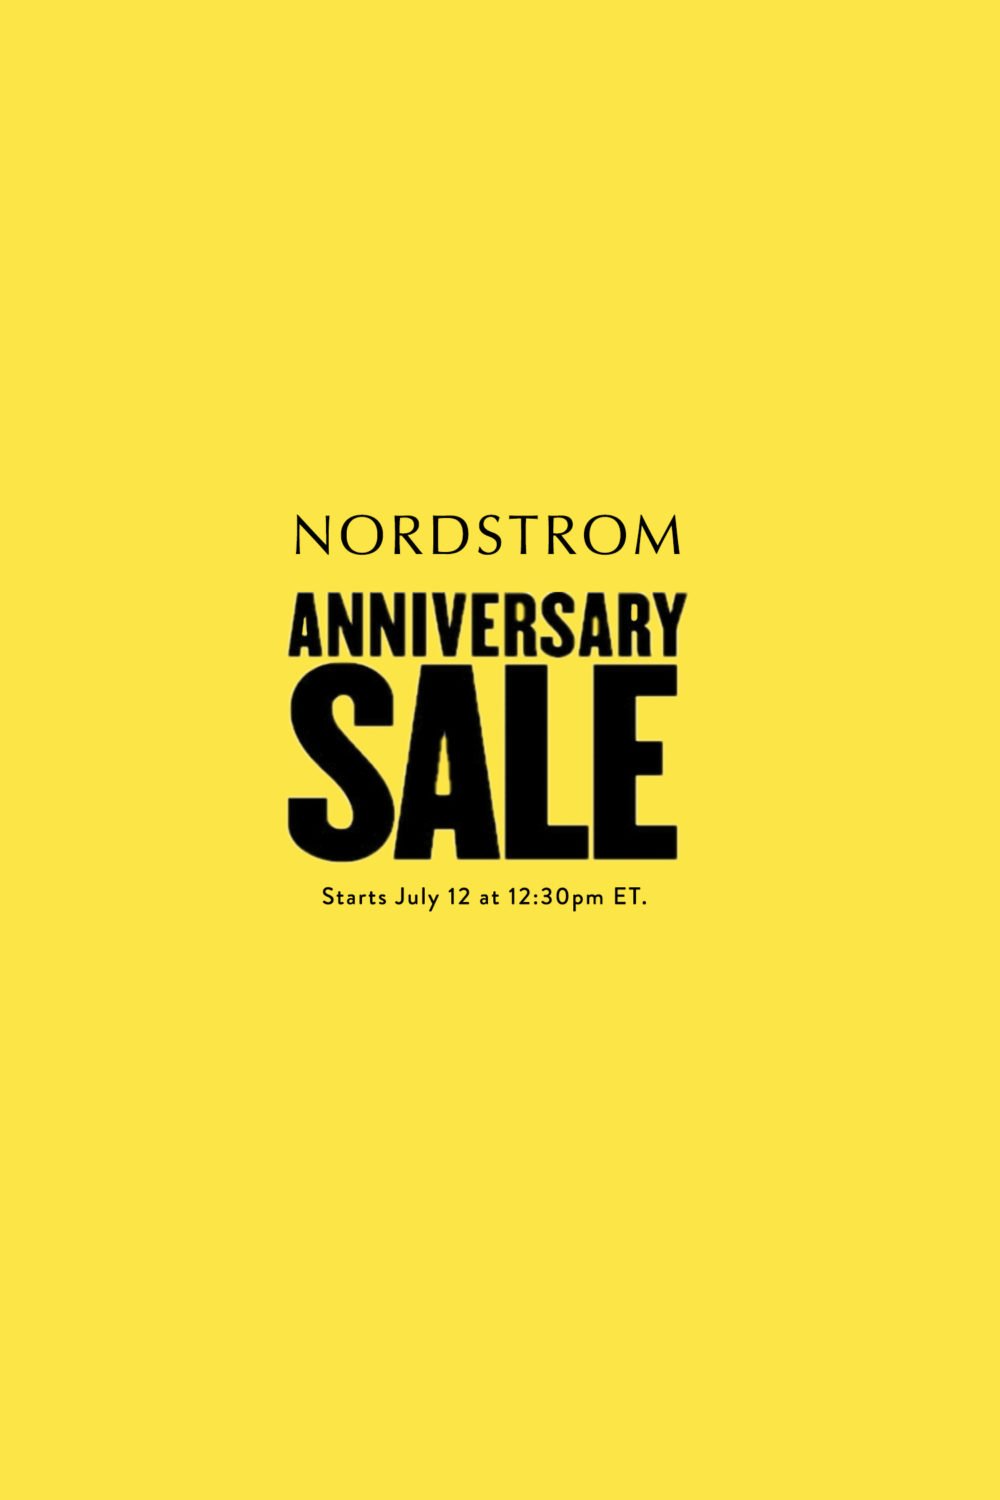 How to Prep for the 2018 Nordstrom Anniversary Sale! Addison's Wonderland